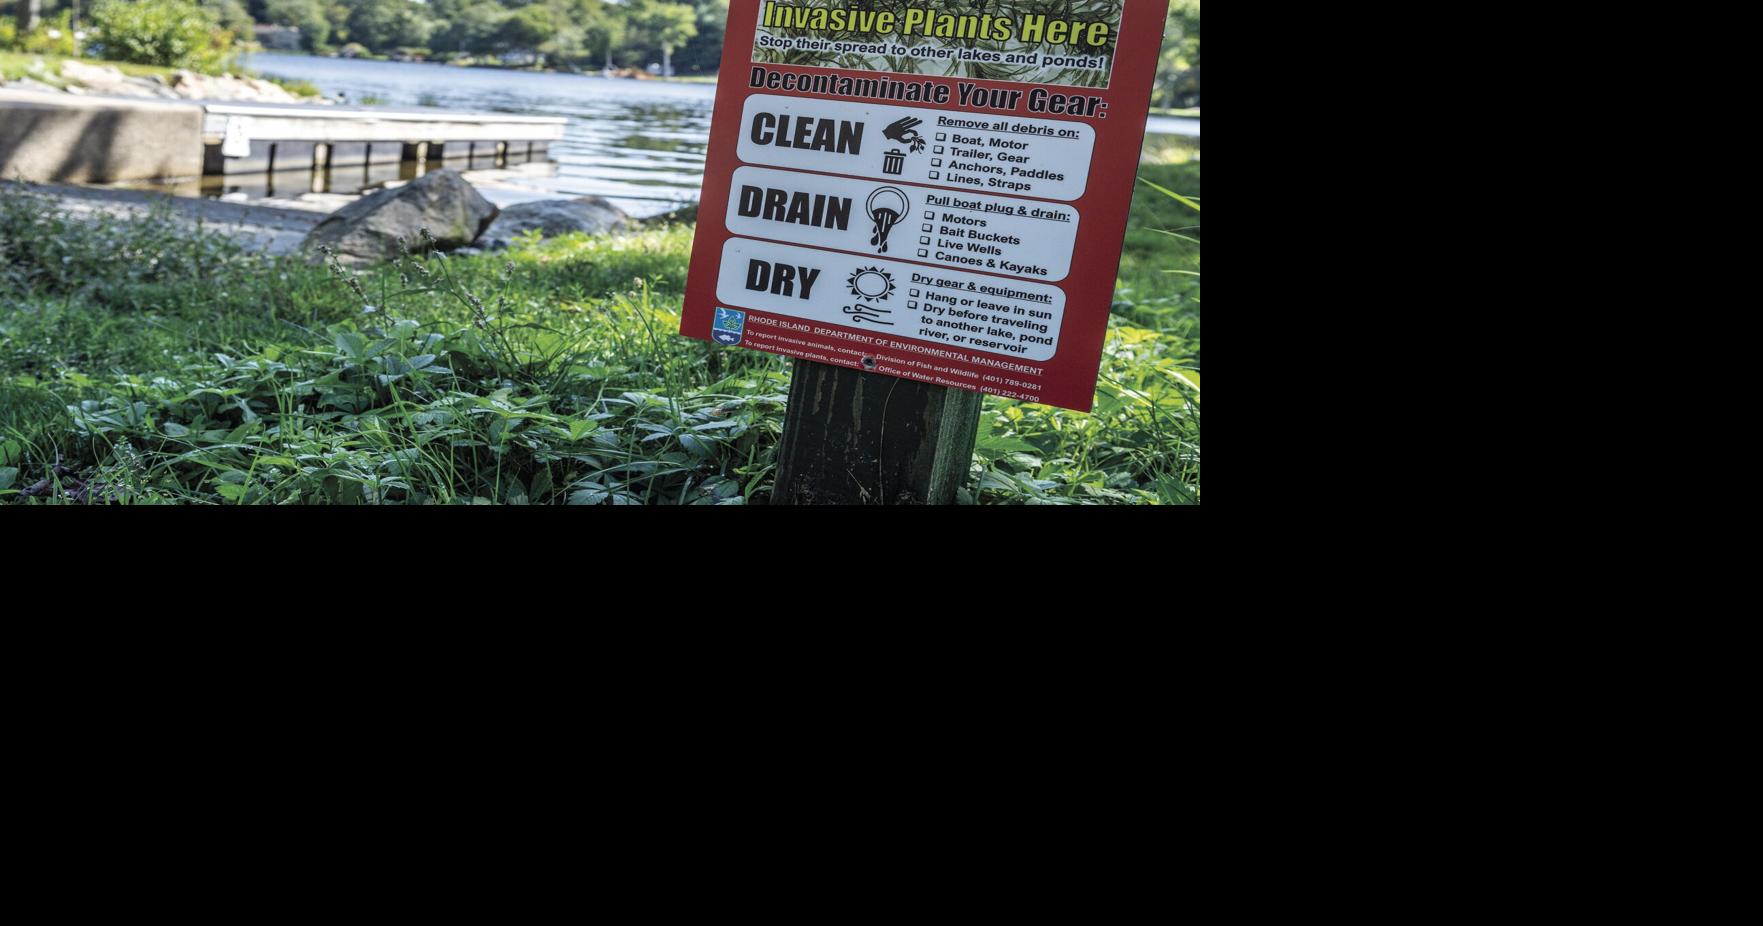 Indian Lake homeowners faced with fight against invasive weeds, News